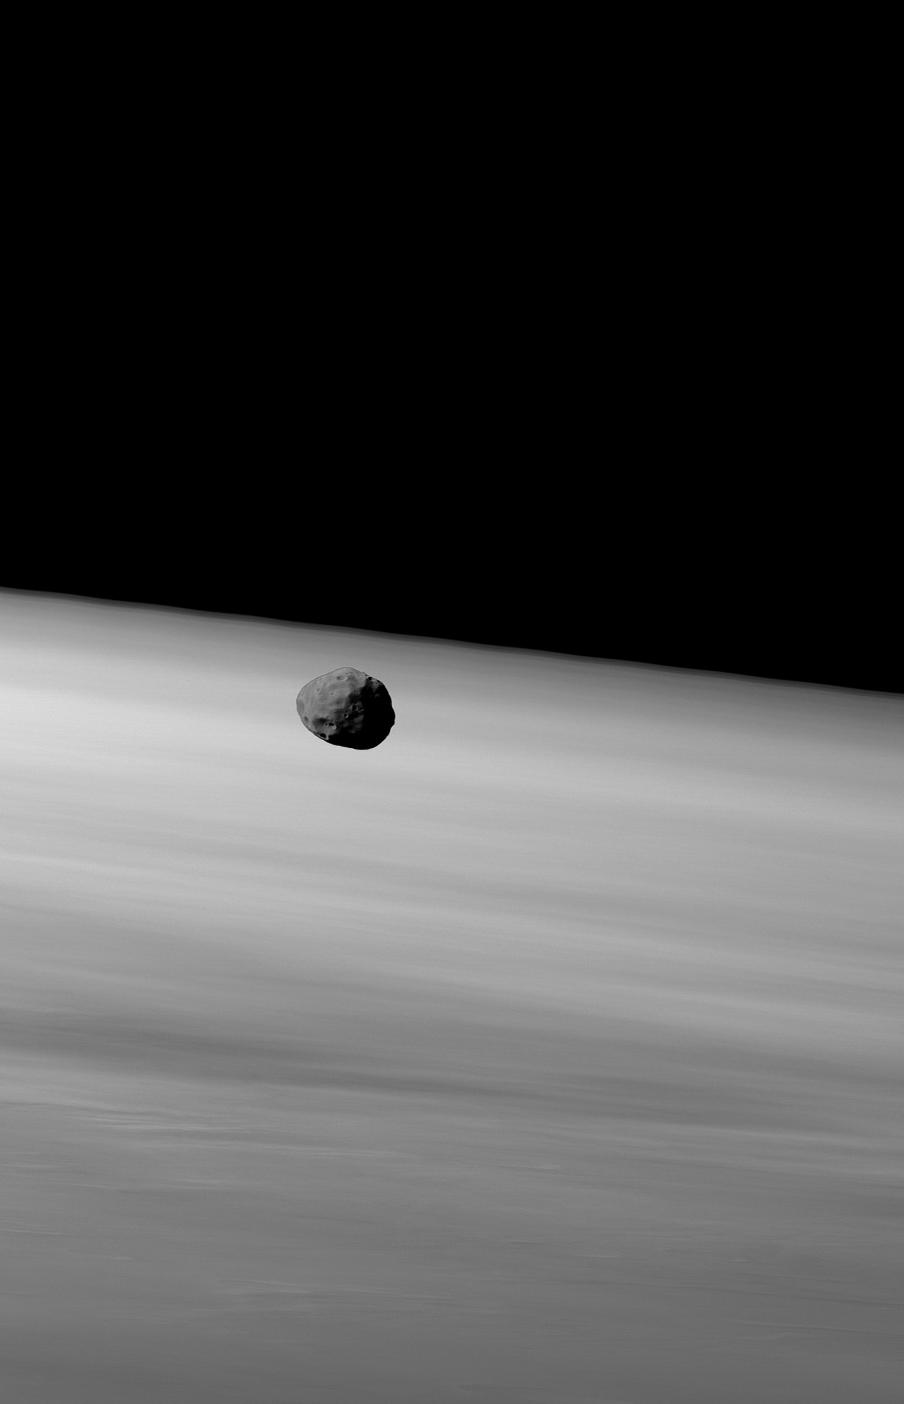 The larger and inner of the two martian moons, Phobos, is seen here floating just above the martian limb.